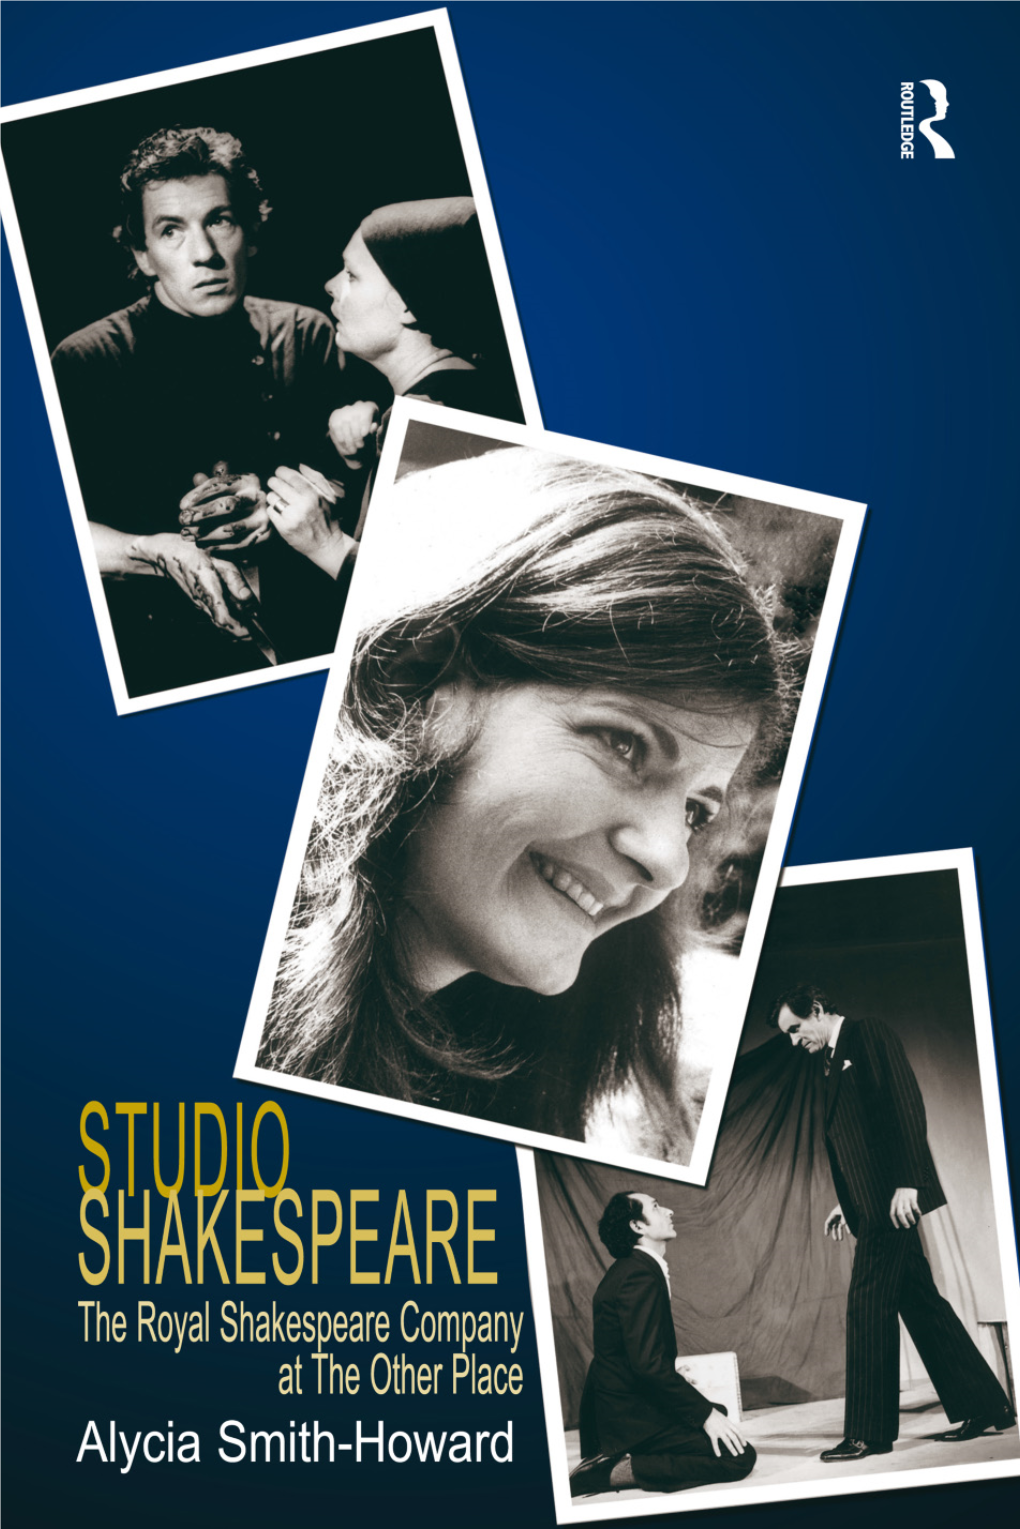 STUDIO SHAKESPEARE the ROYAL SHAKESPEARE COMPANY at the OTHER PLACE for Those Who Have Gone Before